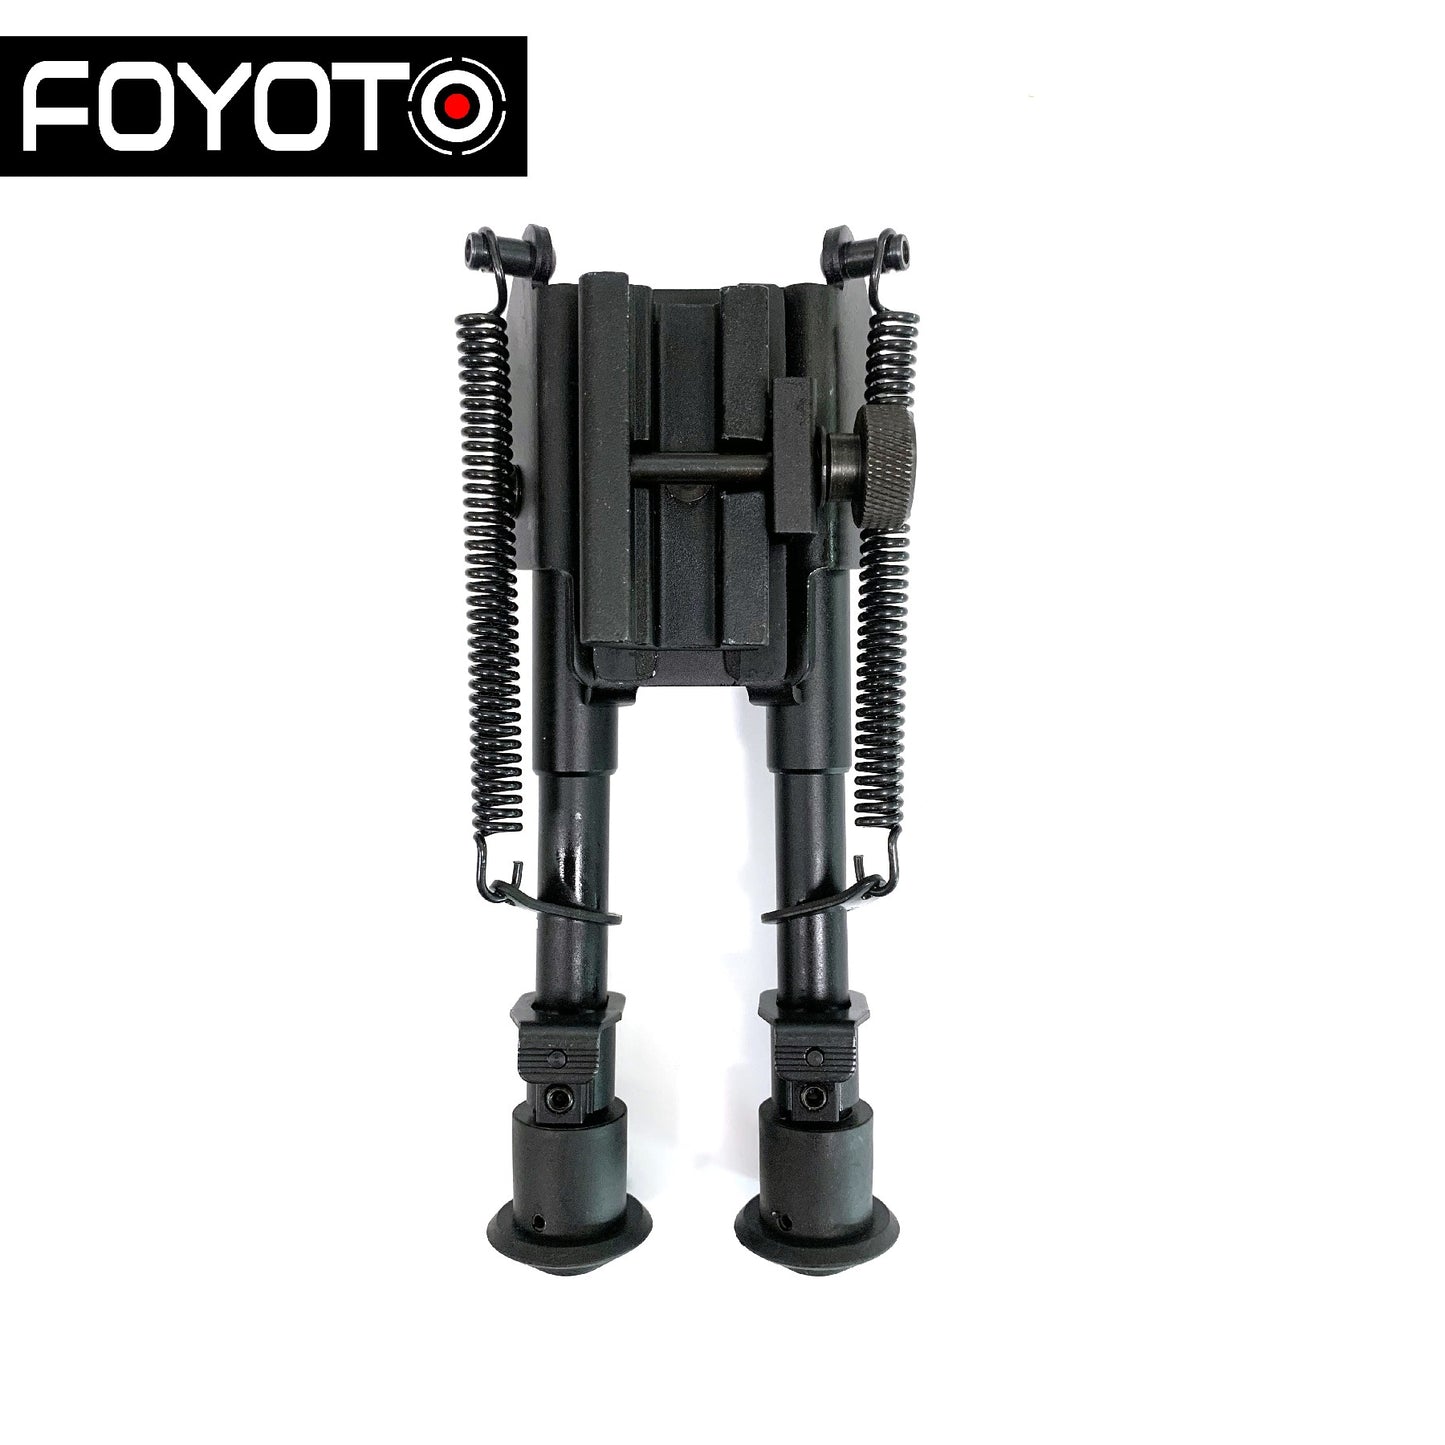 6-27HD 360 degree Rotate head Quick Detach Bipod Black Extension Flat Adjustable Stable Tactical TRipod Secure To Rifle